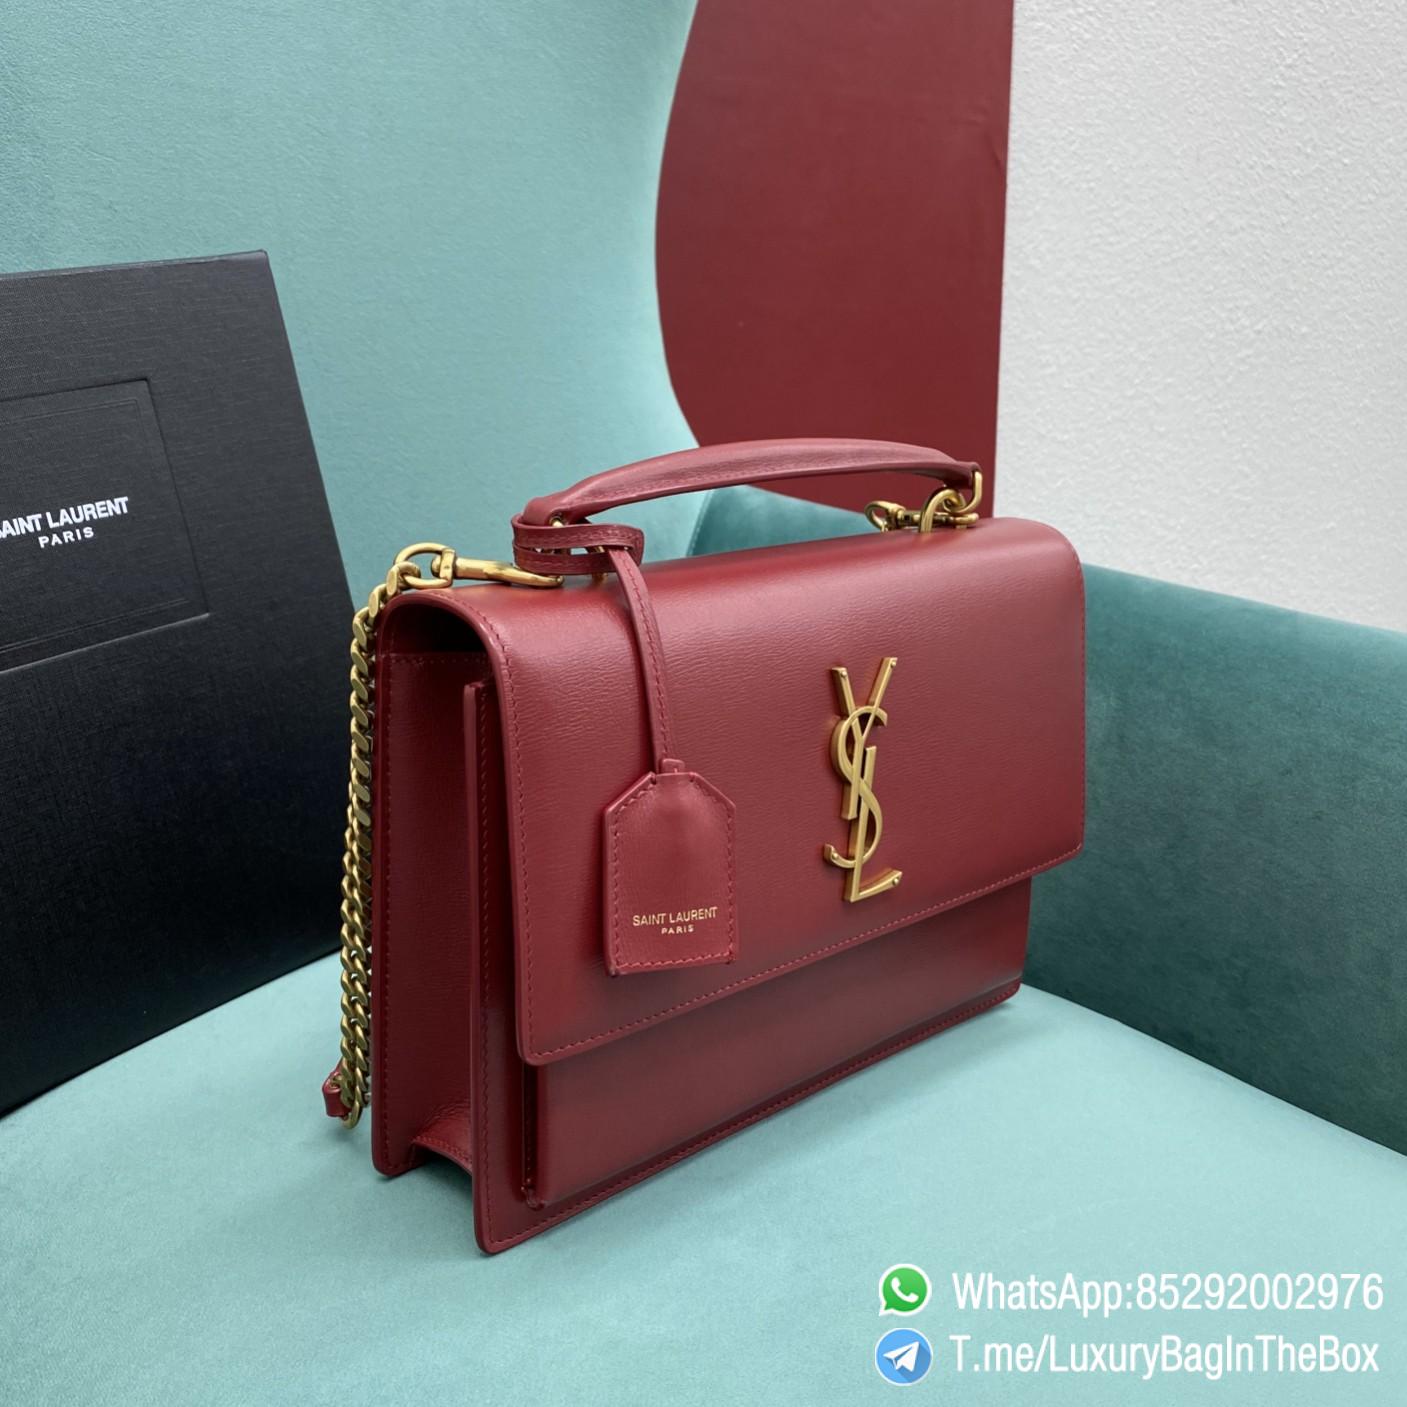 YSL MEDIUM SUNSET SATCHEL IN SMOOTH LEATHER SATCHEL FRONT FLAP TOP HANDLE ADJUSTABLE AND DETACHABLE LEATHER AND CHAIN STRAP BRONZE METAL YSL INITIALS SKU 634723D420W6008 02